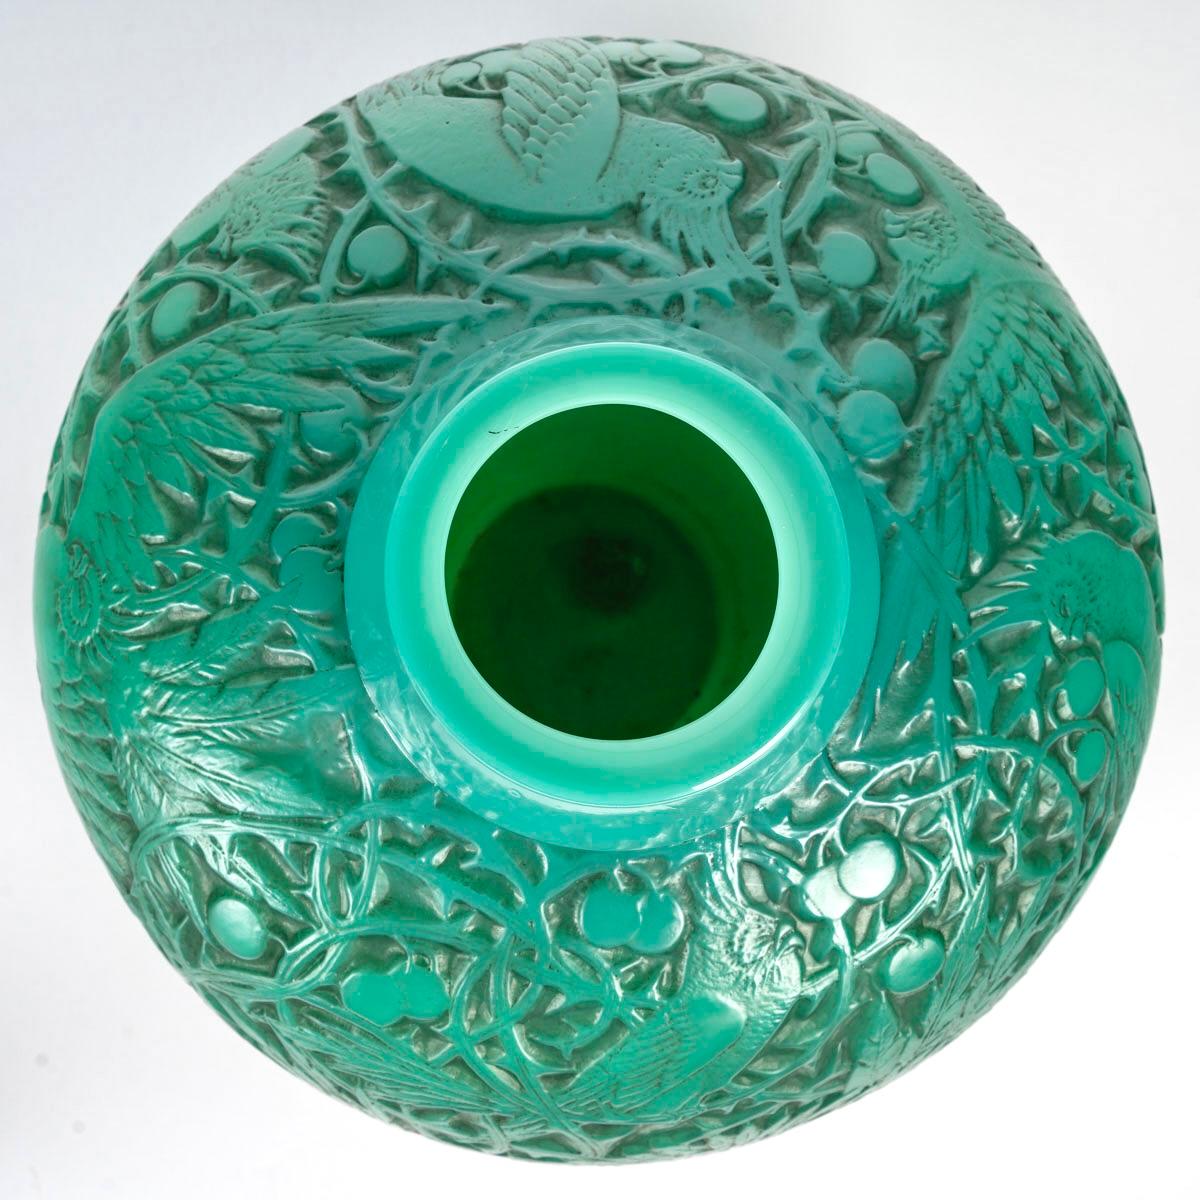 1924 René Lalique - Vase Aras Cased Jade Green Glass With Grey Patina Parrots In Good Condition For Sale In Boulogne Billancourt, FR